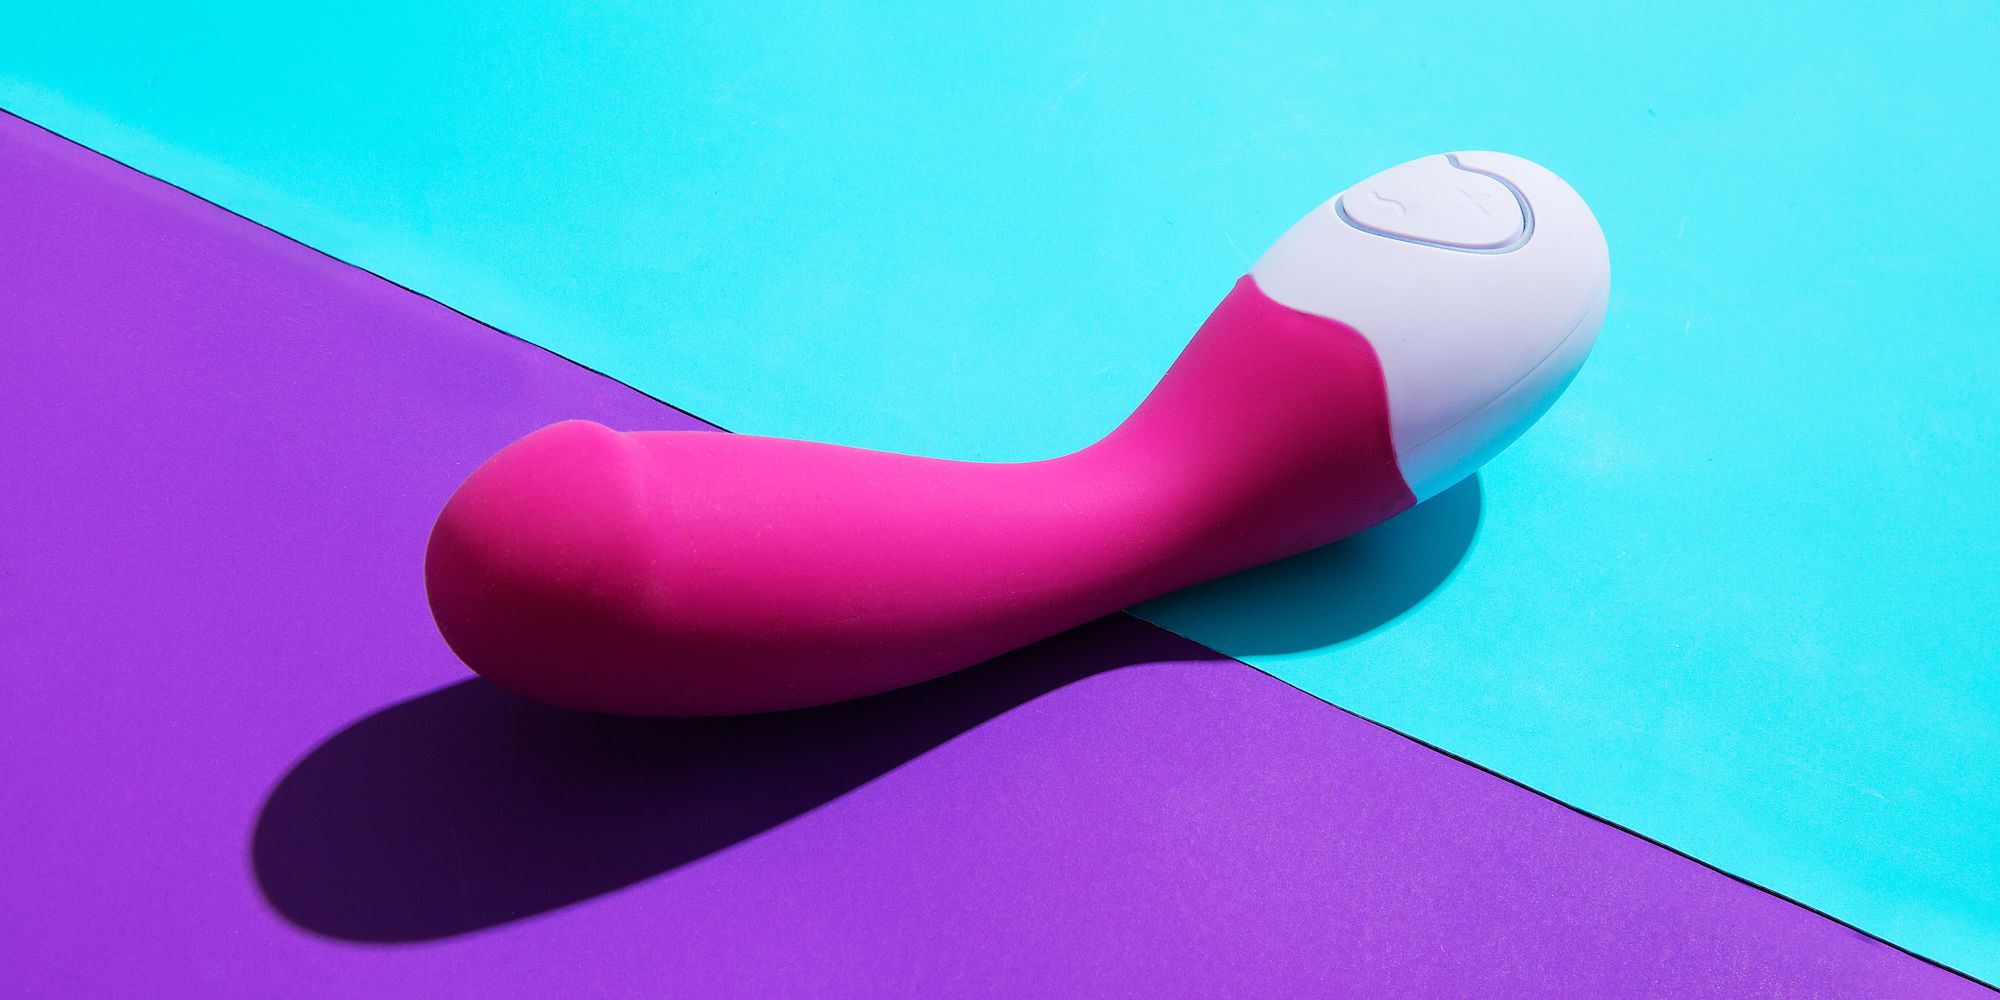 How Does Using a Vibrator Affect Your Body?